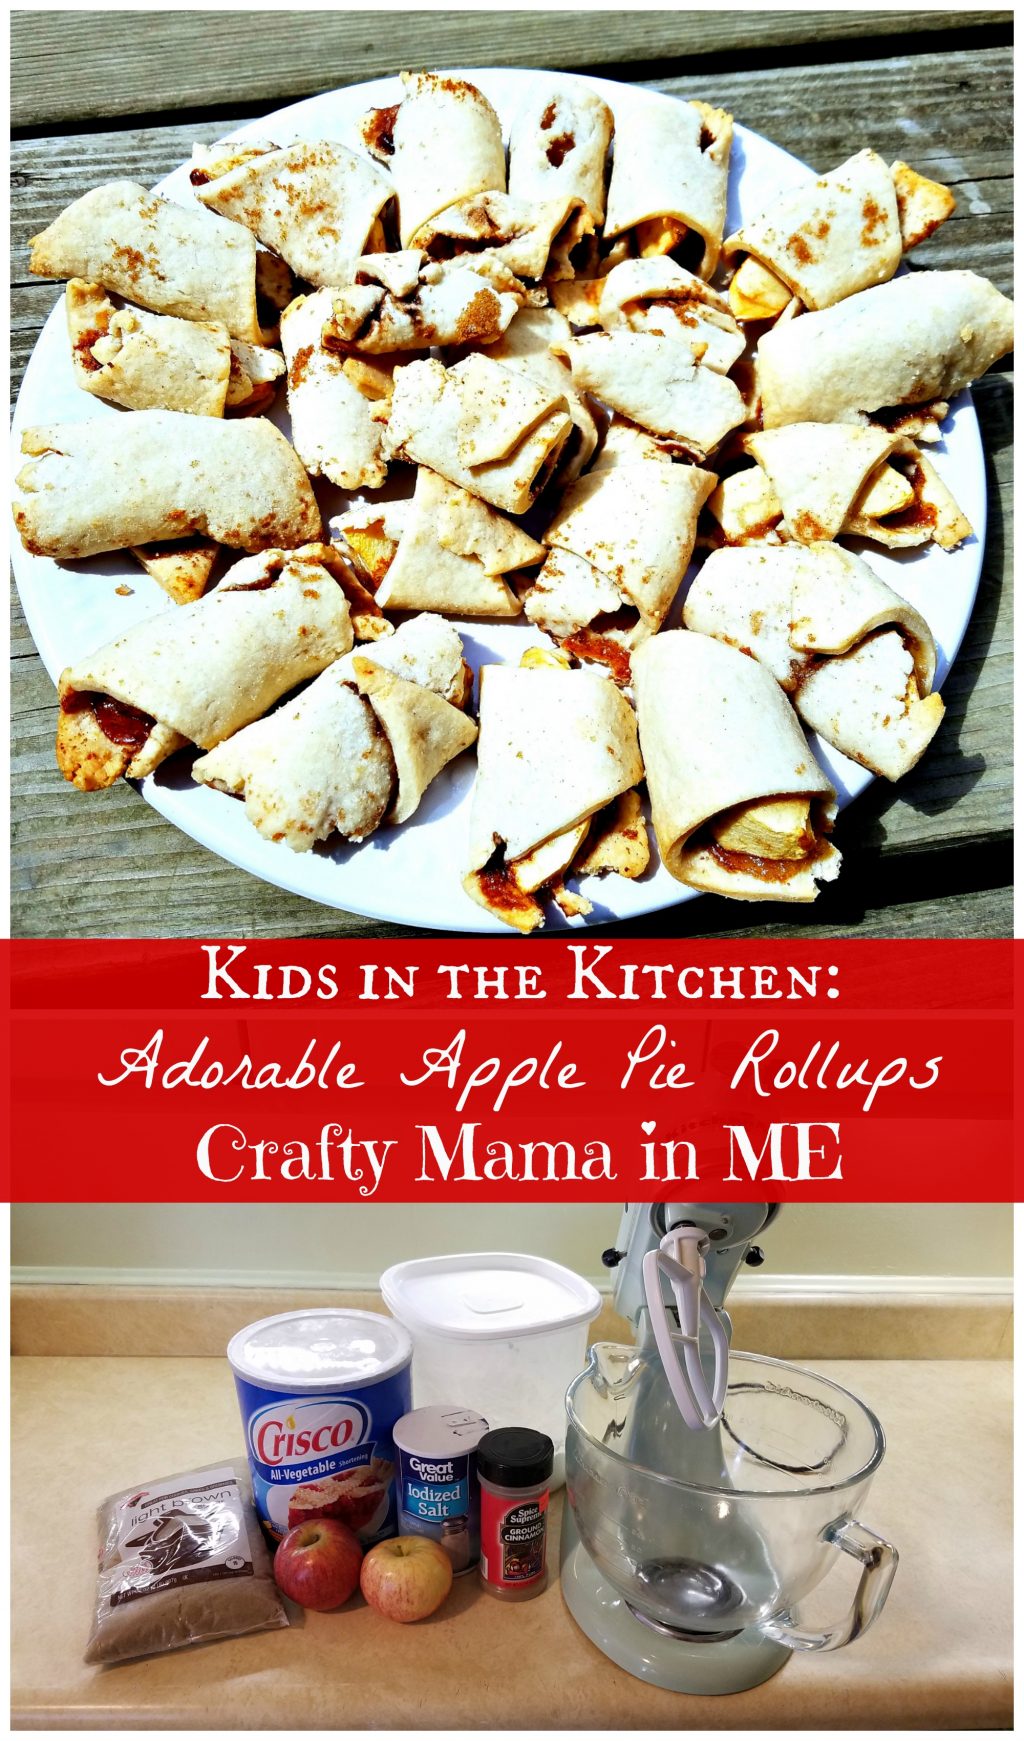 Kids in the Kitchen: Adorable Apple Pie Rollups